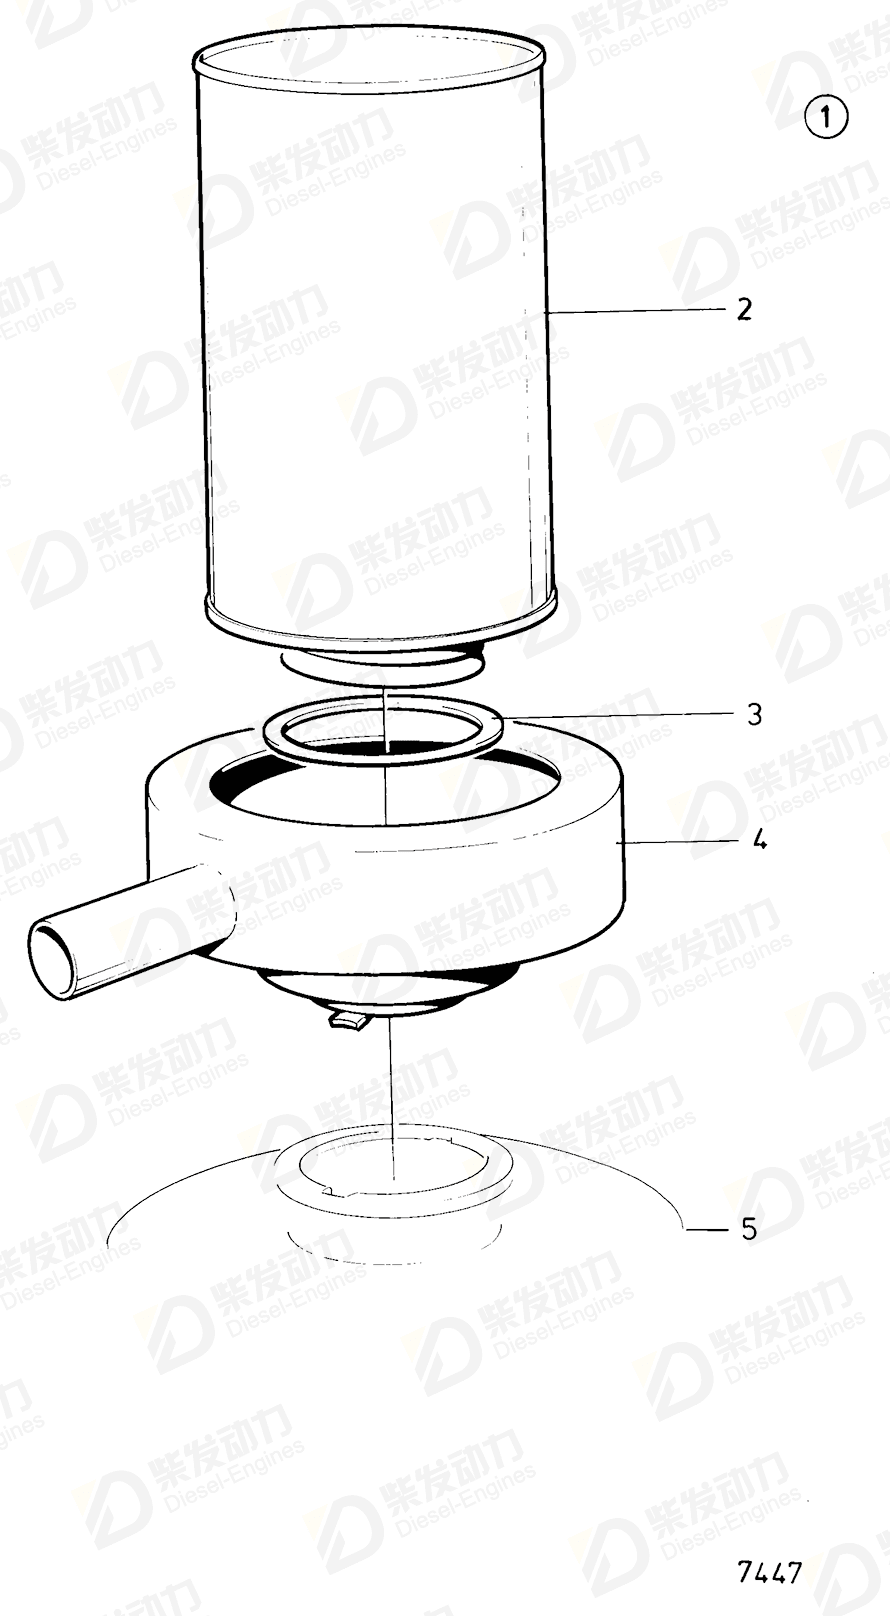 VOLVO Filter 876070 Drawing